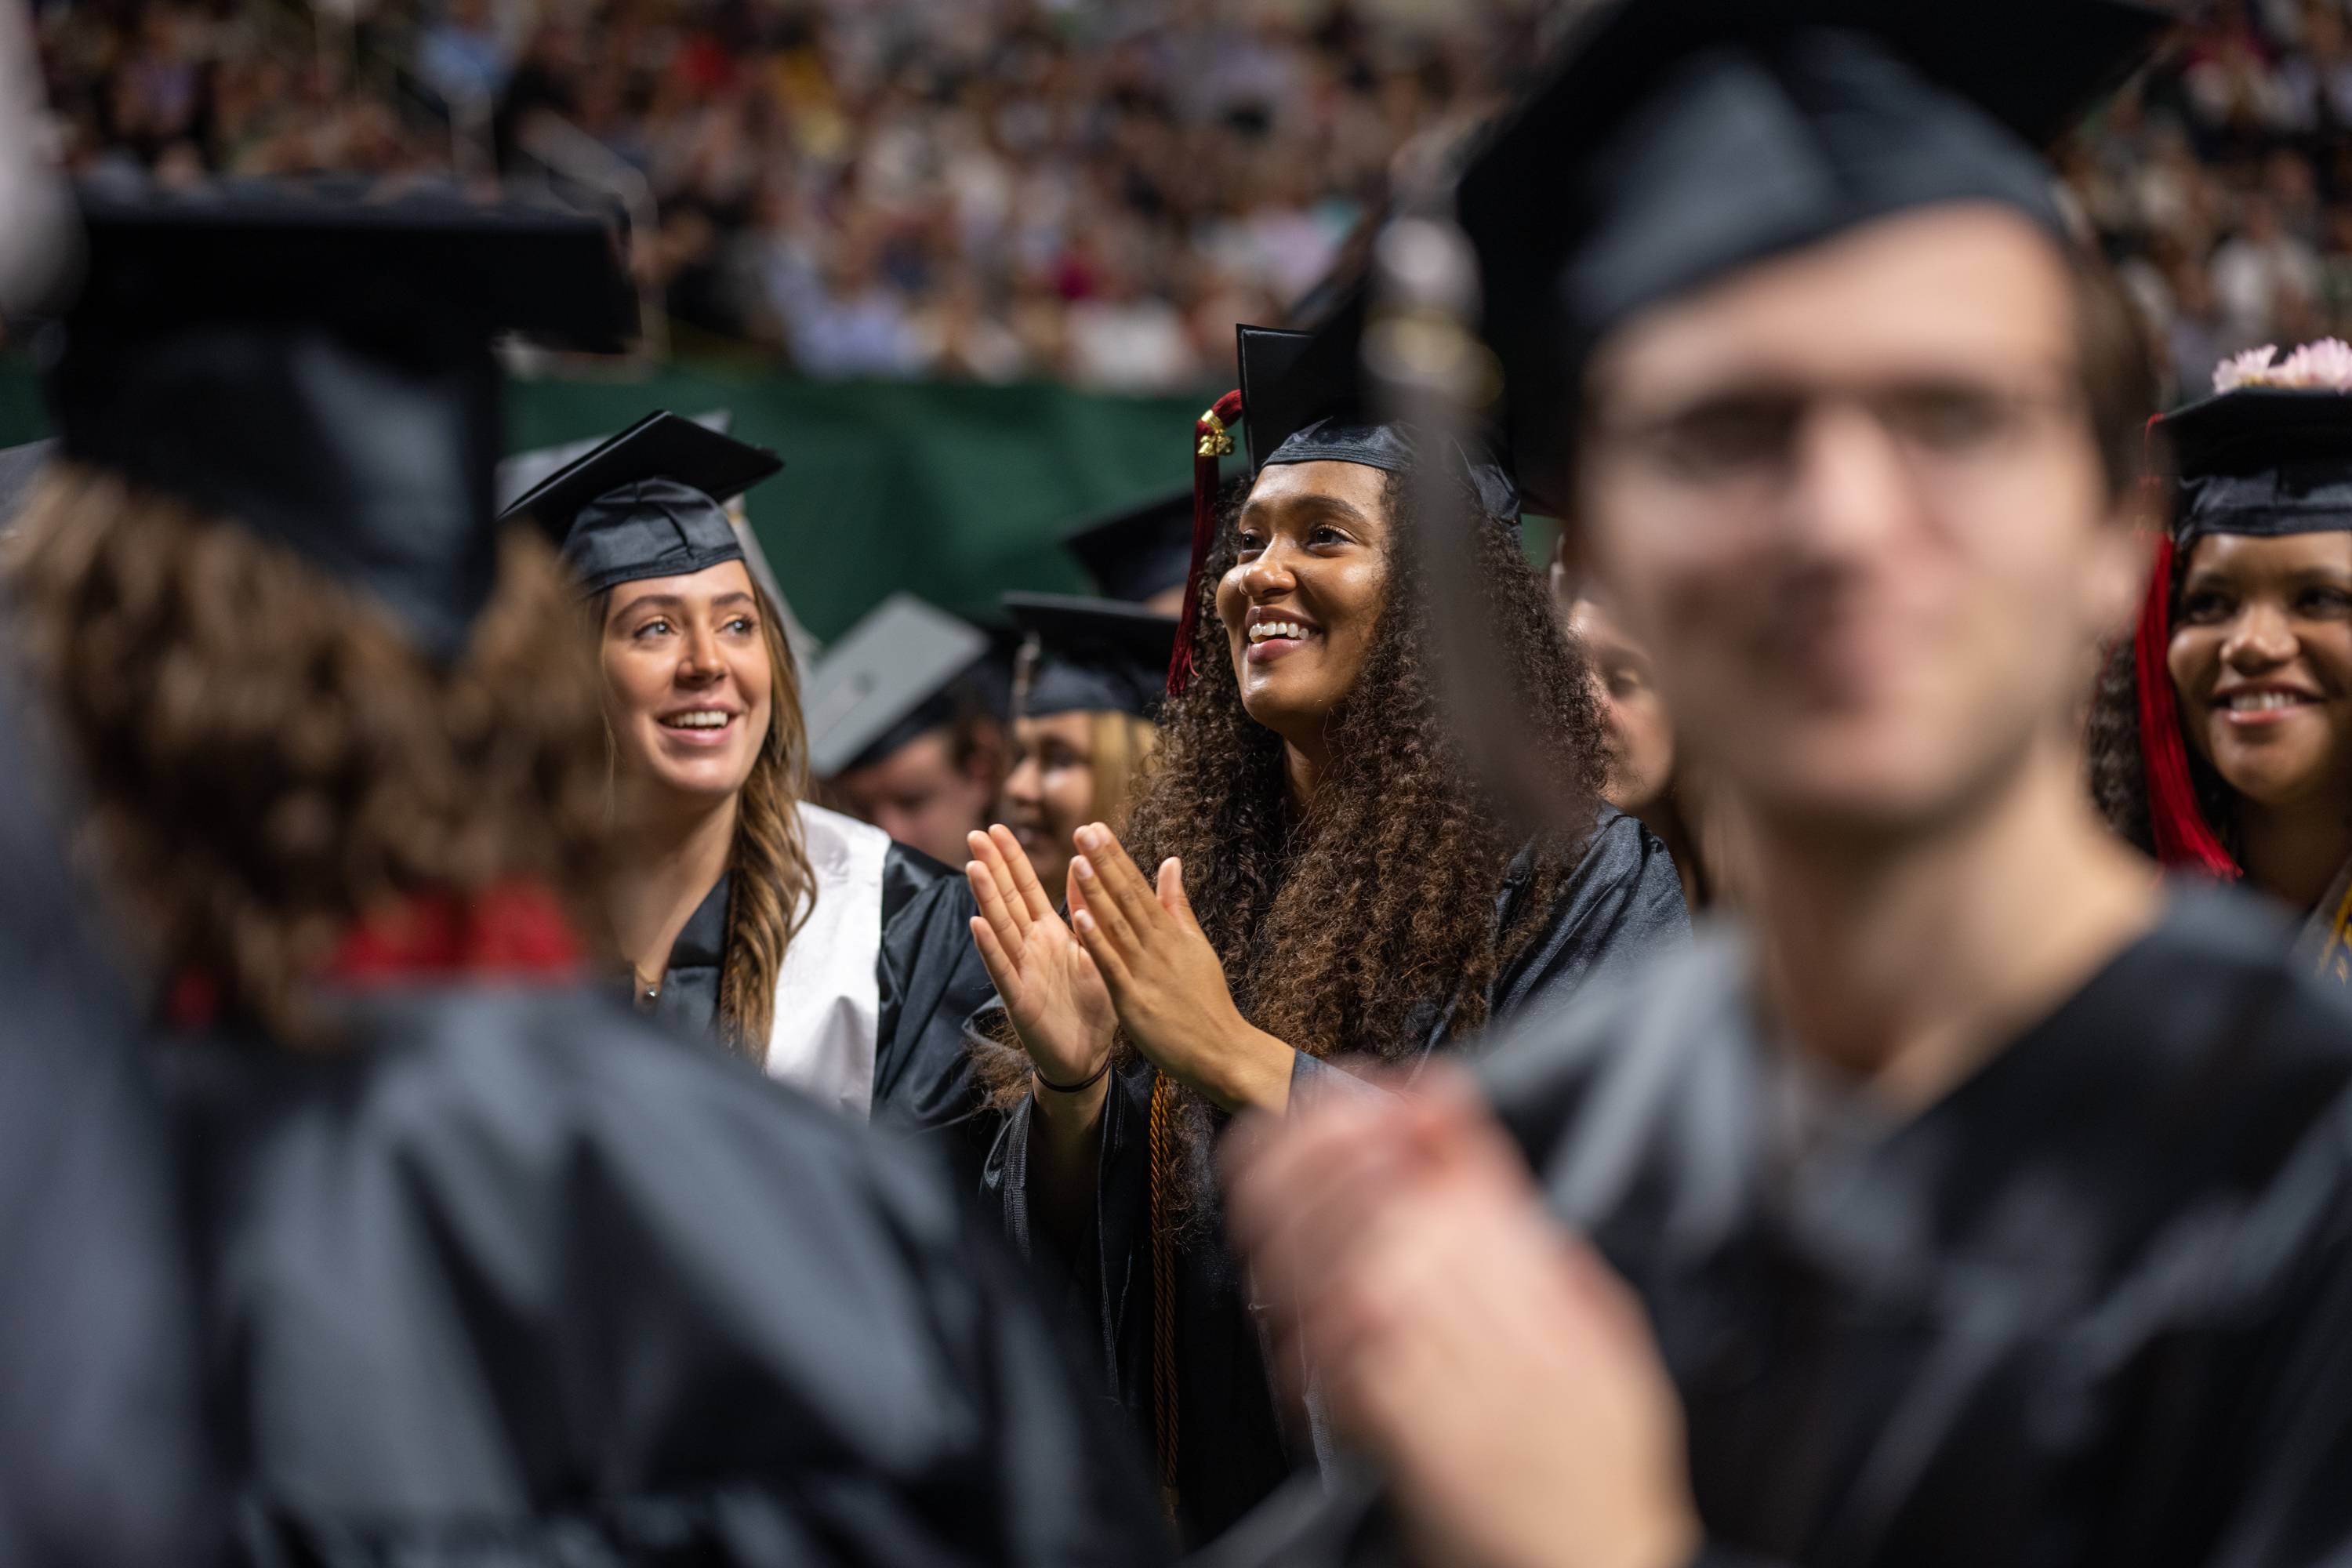 OHIO's graduating students shared Bobcat pride with lots of cheering and enthusiasm at each of the Commencement ceremonies.